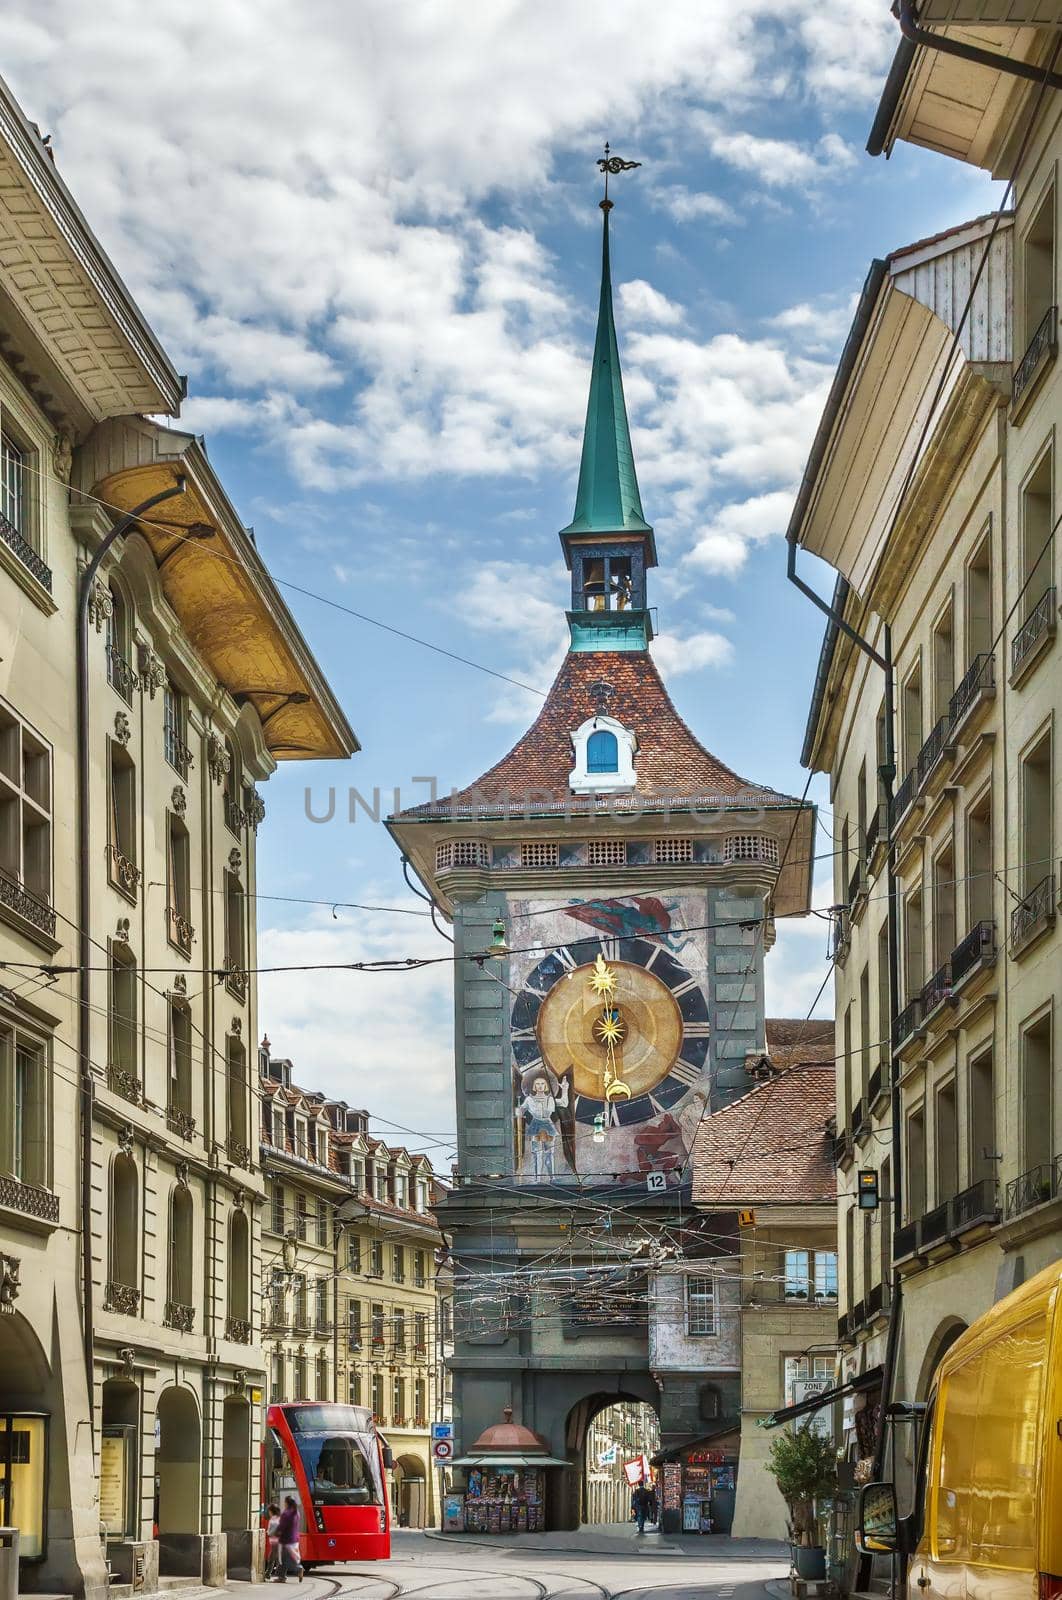 Zytglogge is medieval clock tower in Bern downtown, Switzerland. Western facade